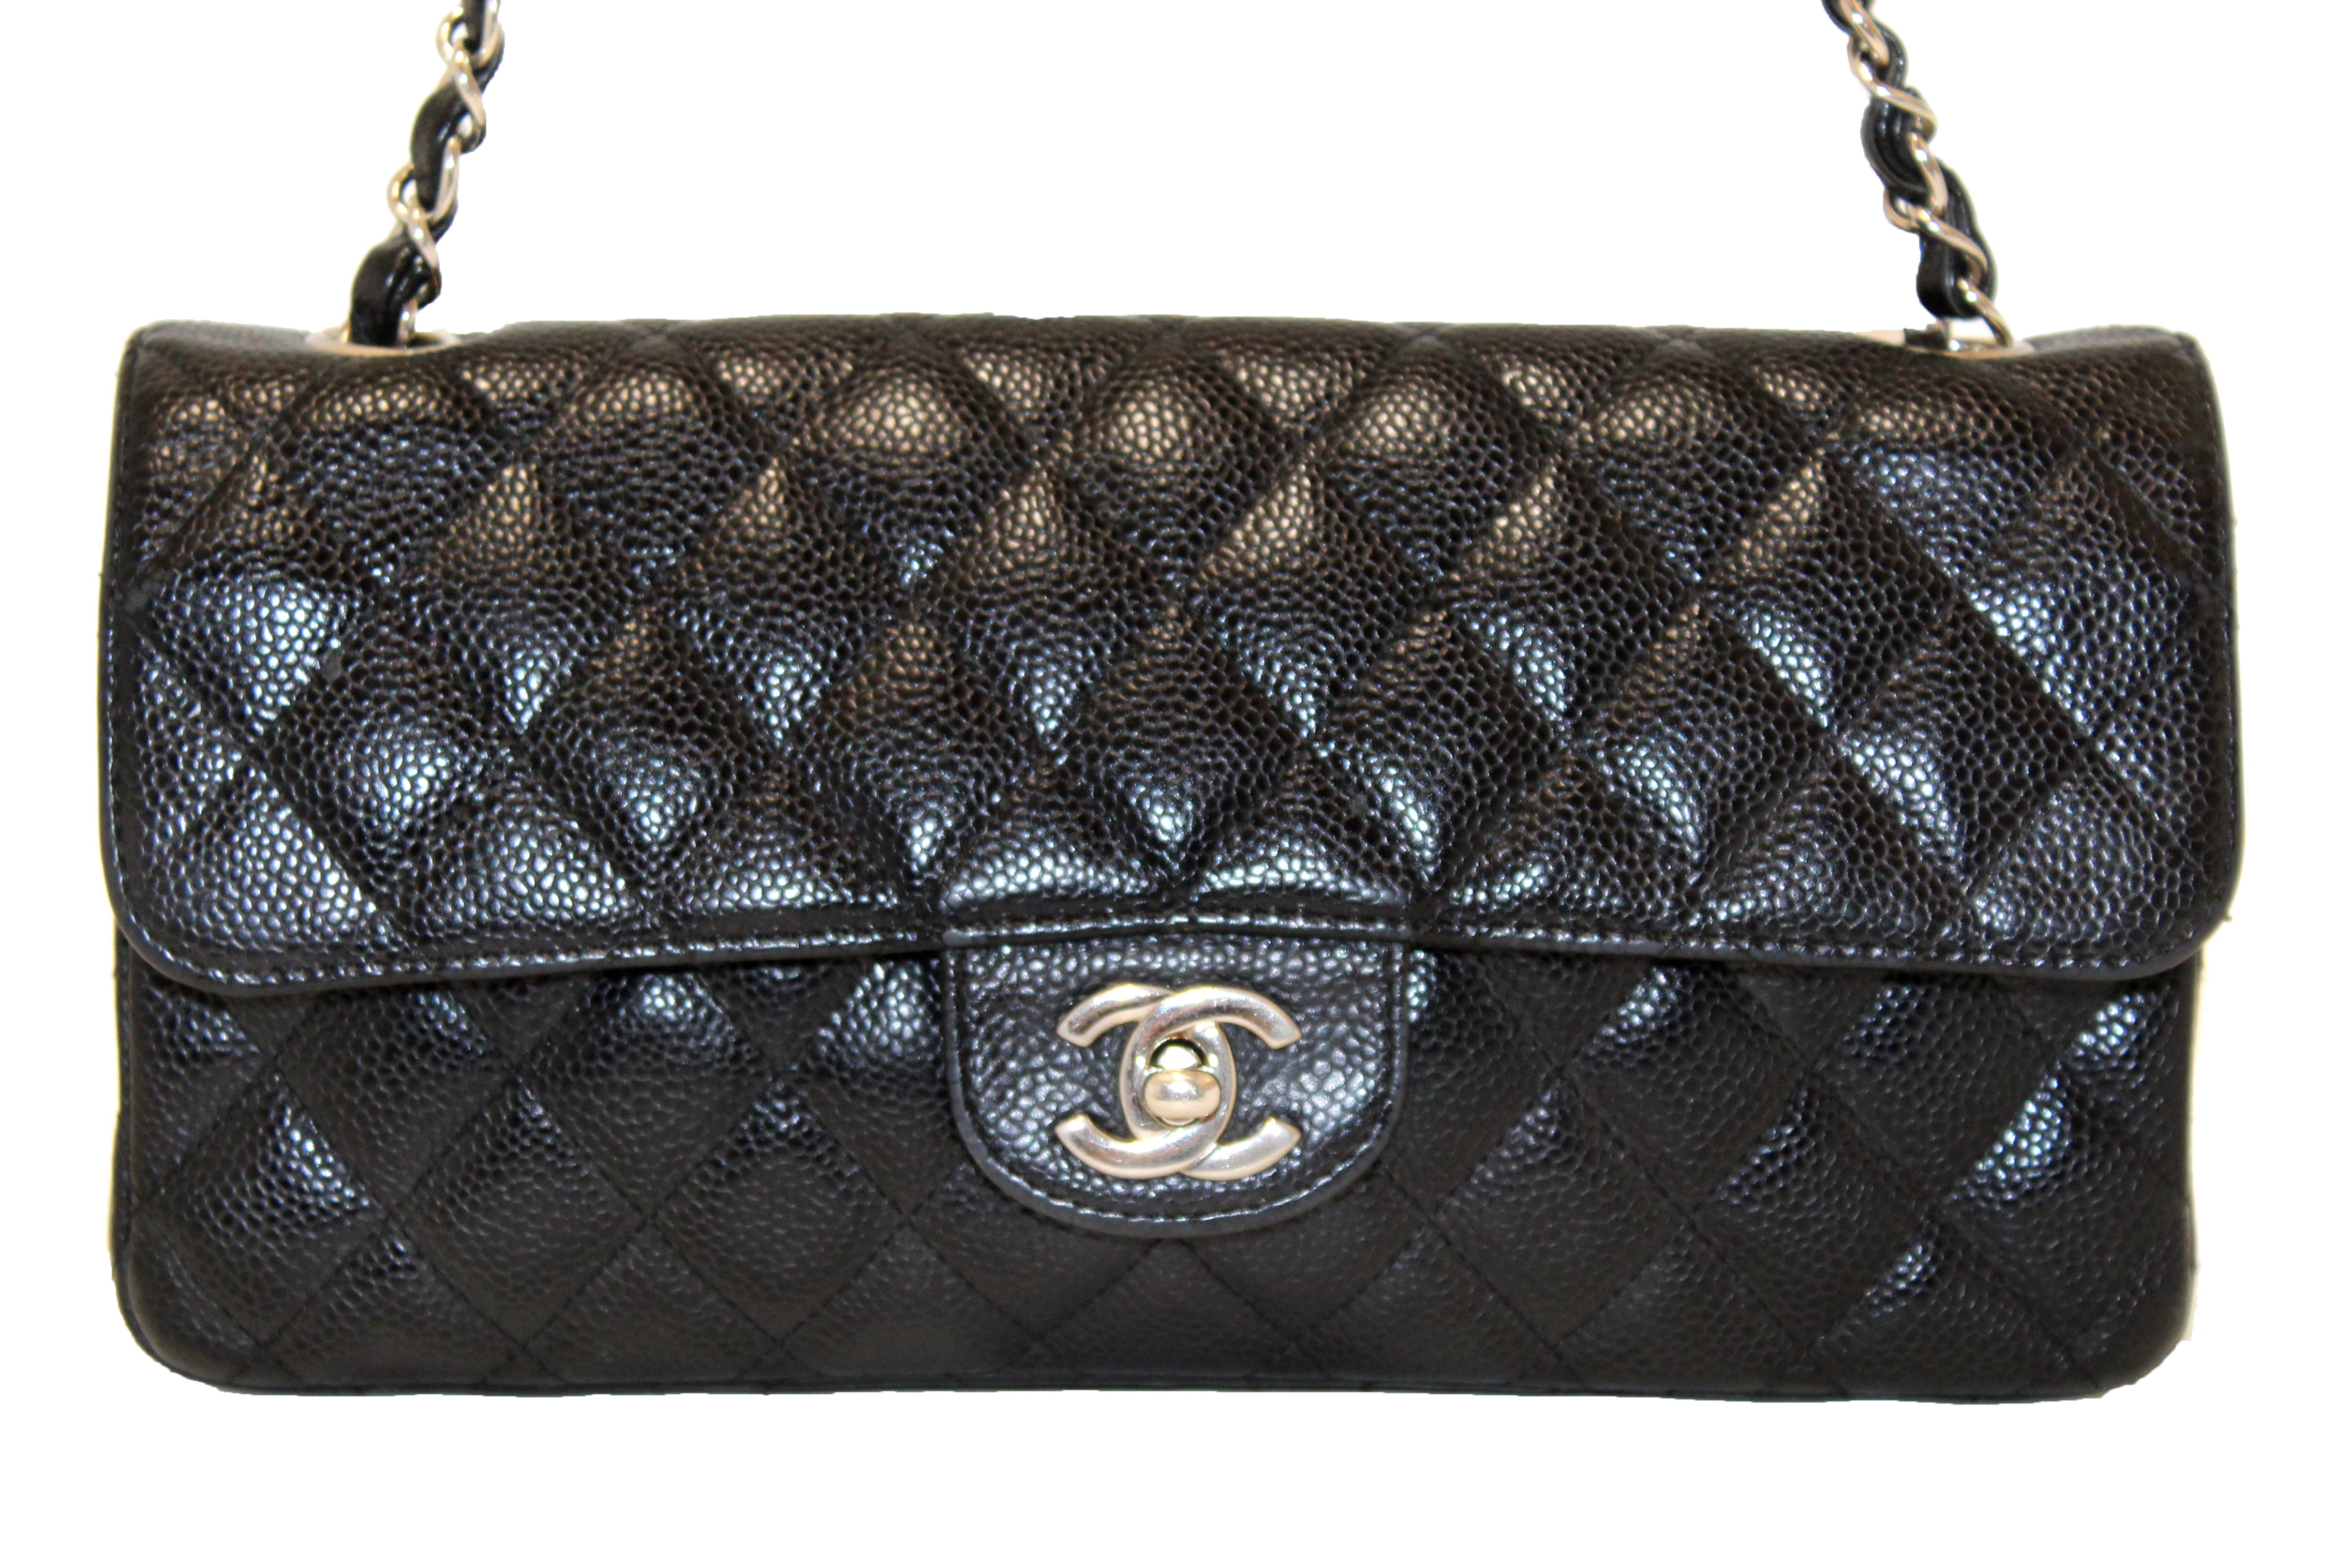 Authentic Chanel Black Quilted Caviar Leather East West Flap Shoulder Bag